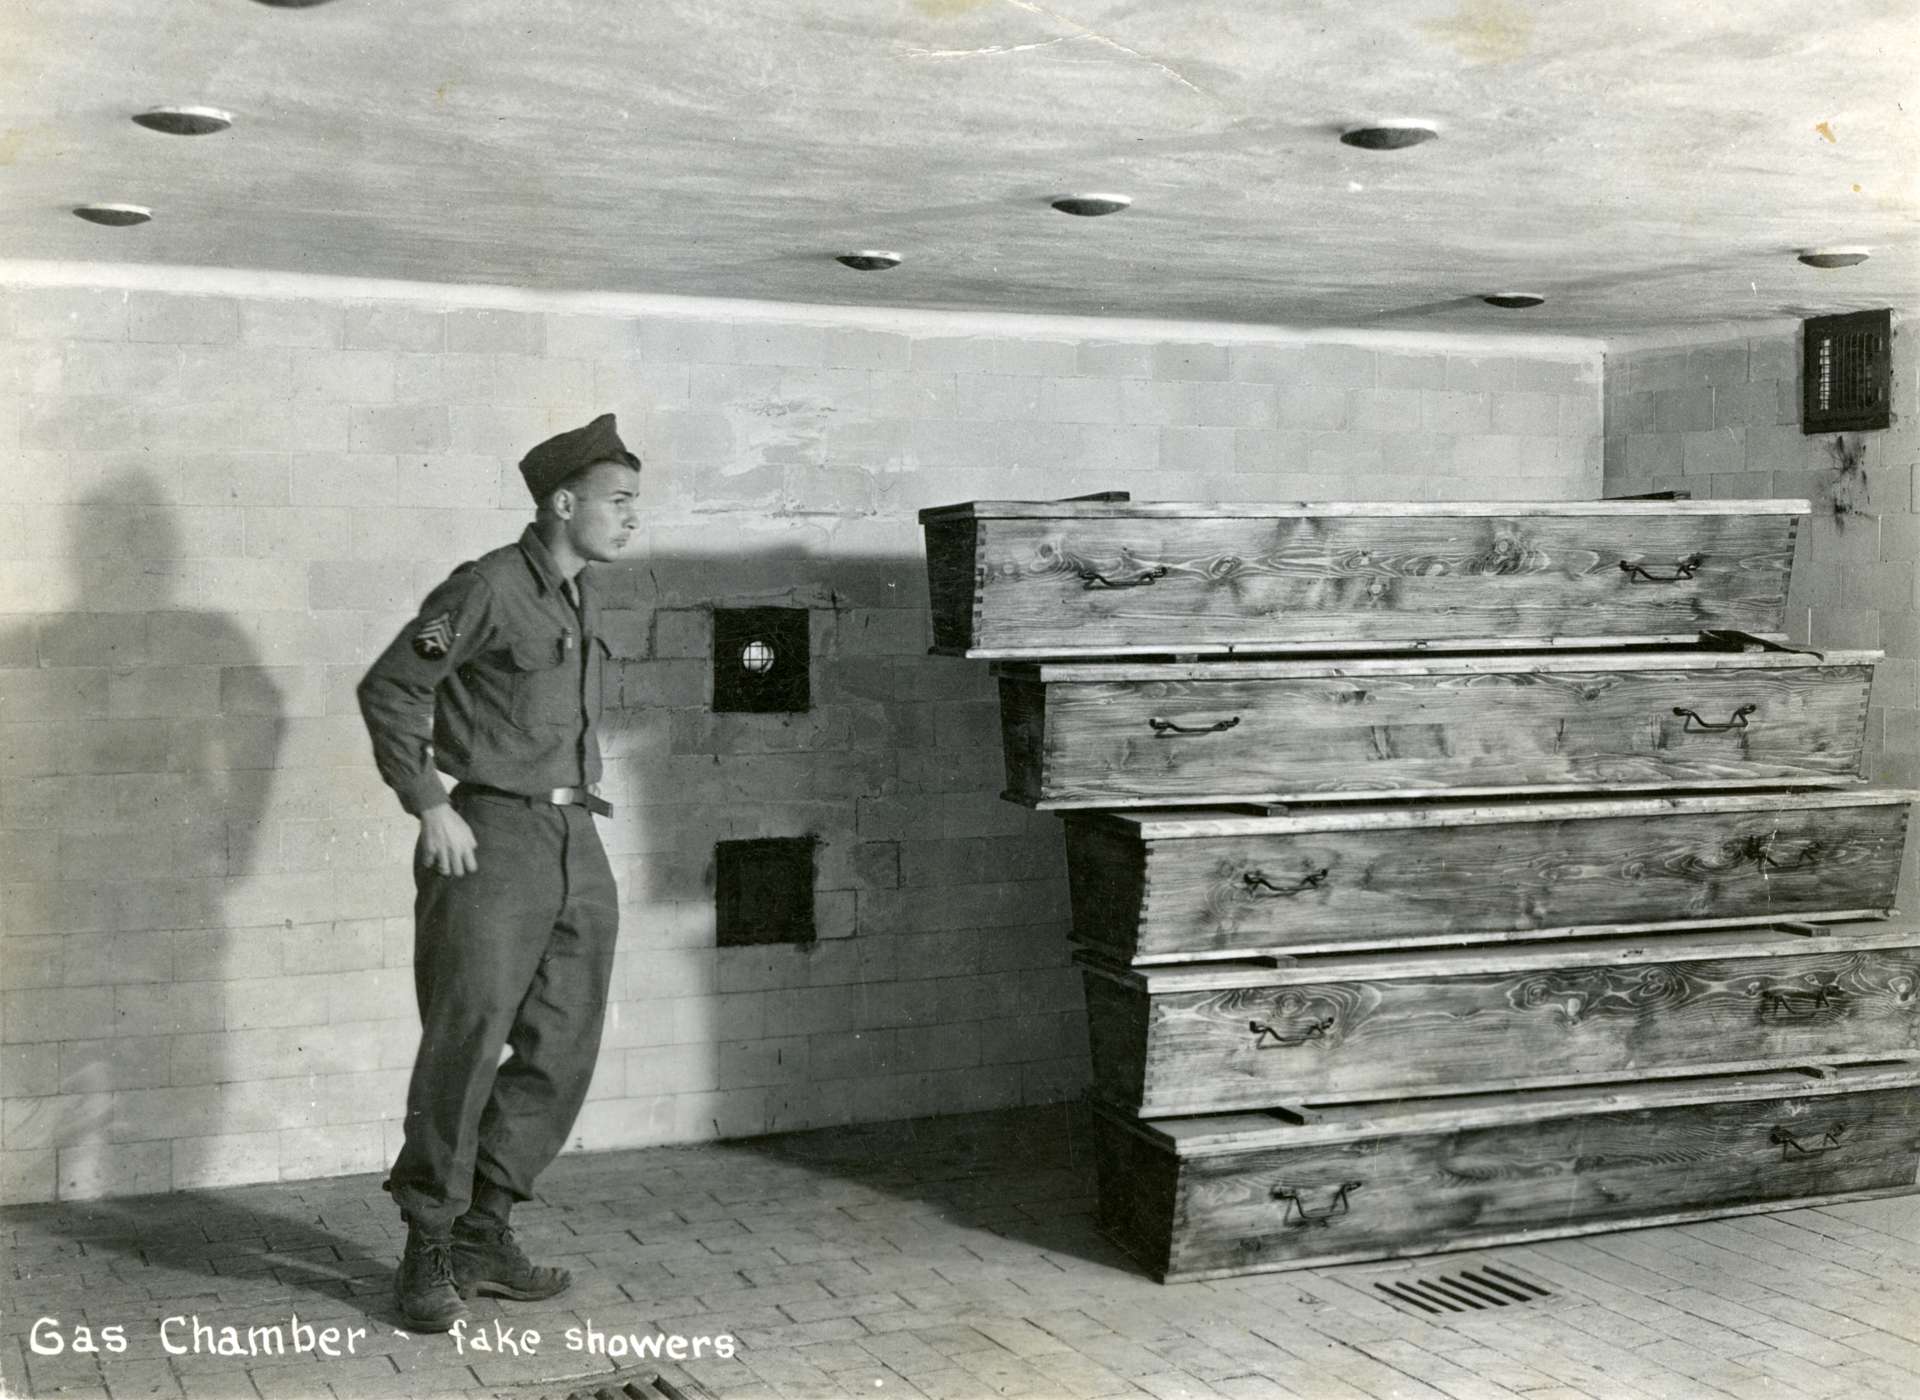 US soldier standing in the gas chamber in the Dachau concentration camp, 1945. Five wooden caskets are stacked along the wall. US Army Signal Corps photo, Gift of the United States Holocaust Memorial Museum, from the Collection of The National World War II Museum, 2009.373.061.